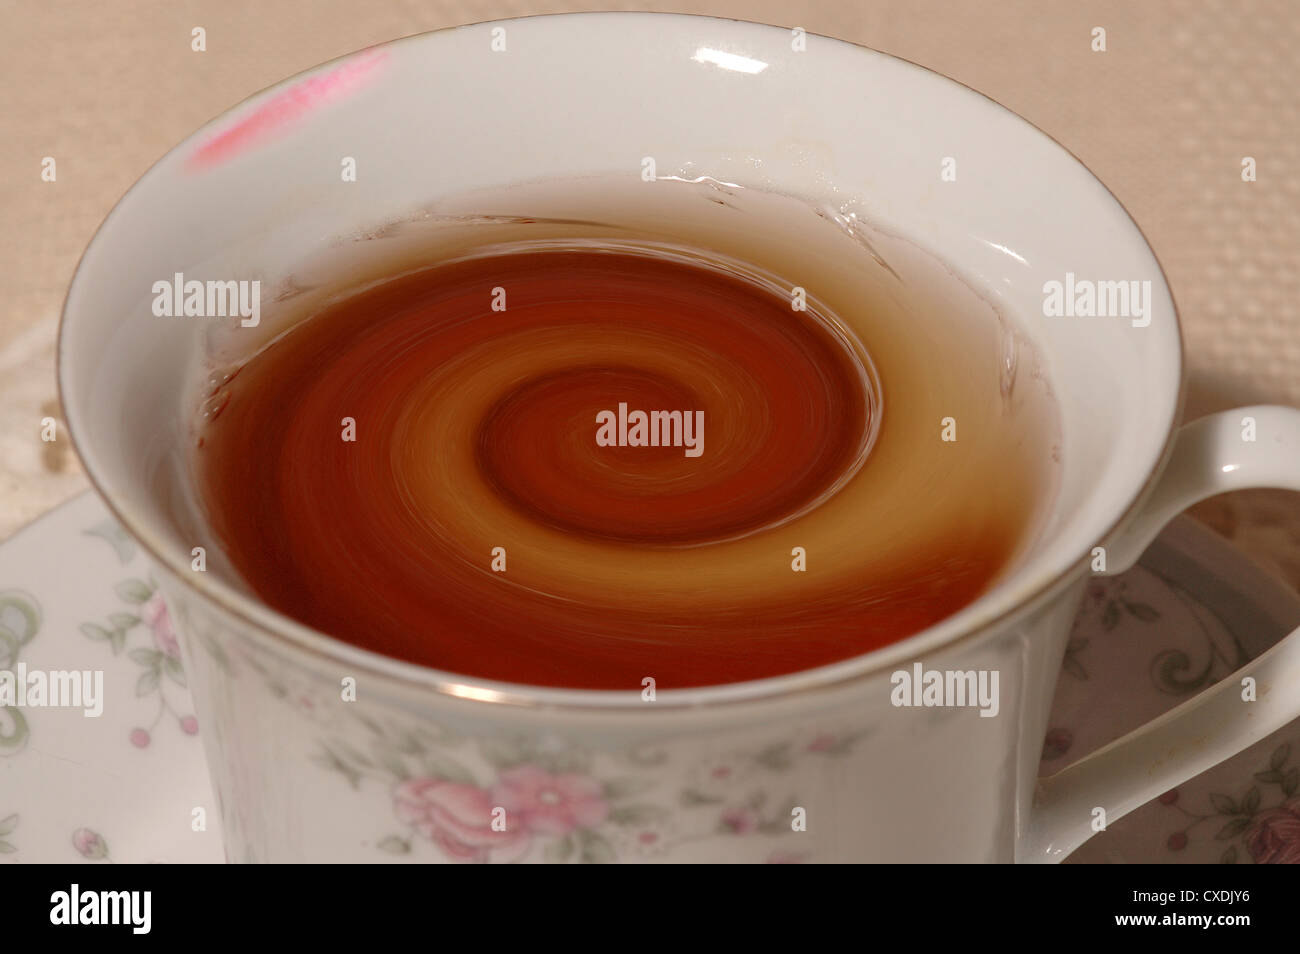 Tea cup filled with whirling tea, with lipstick stain. Stock Photo